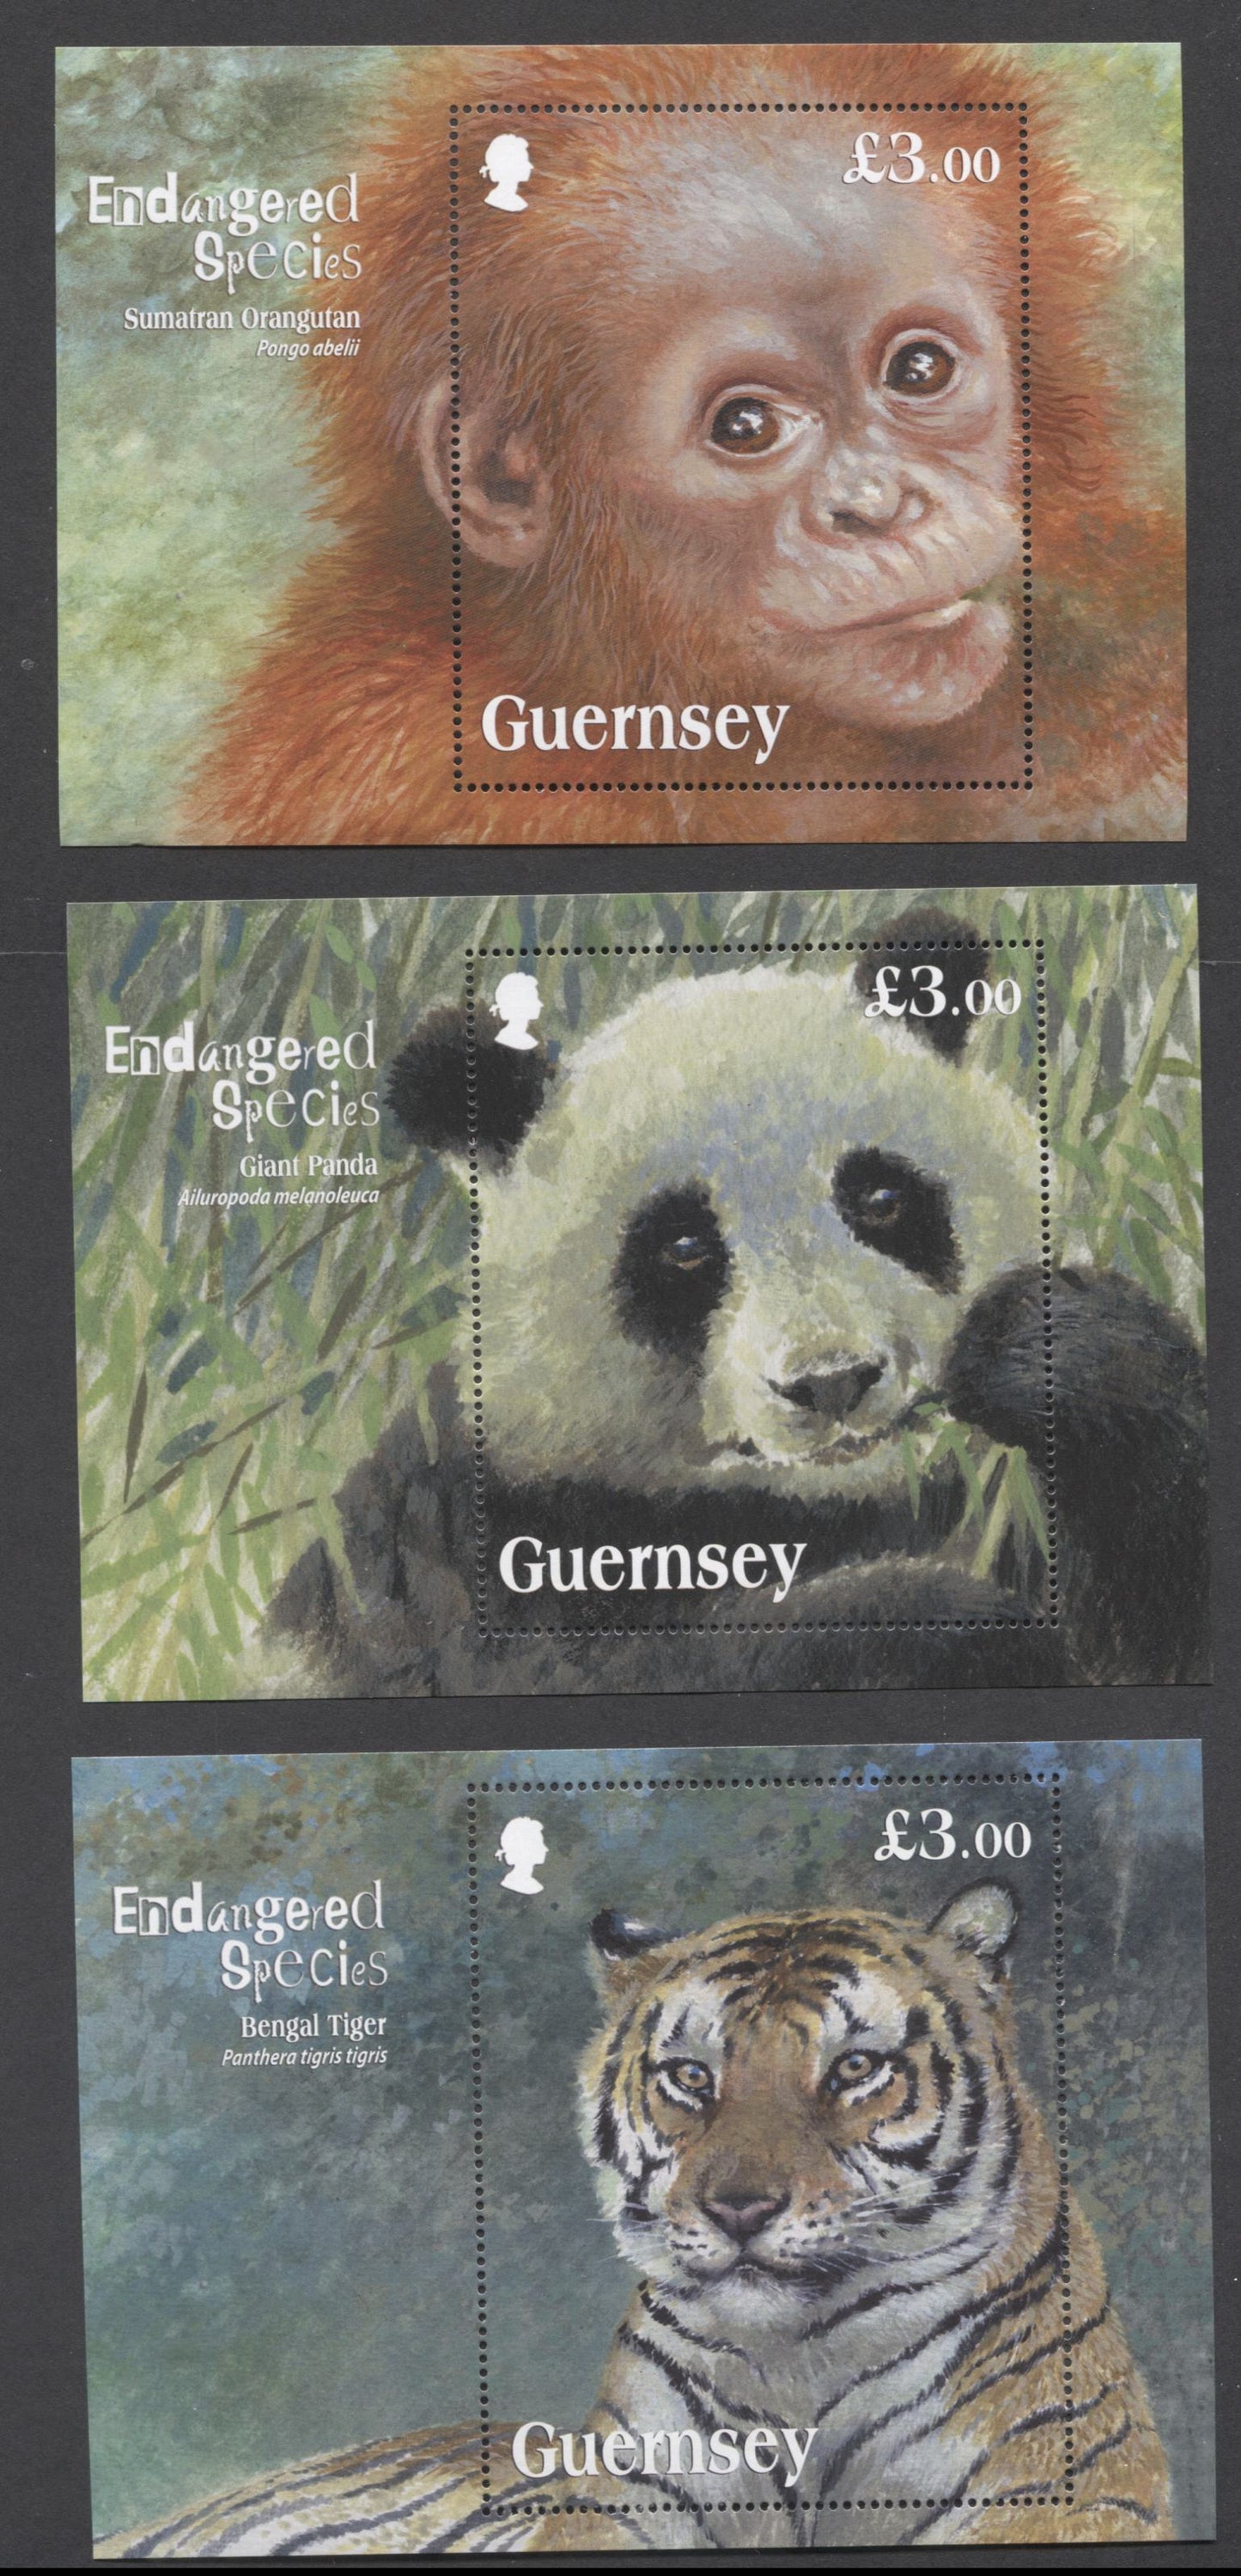 Lot 34 Great Britain - Guernsey SC#1153/1246 2012-2014 Endangered Species Issues, 3 VFNH Souvenir Sheets, Click on Listing to See ALL Pictures, 2017 Scott Cat. $27.75